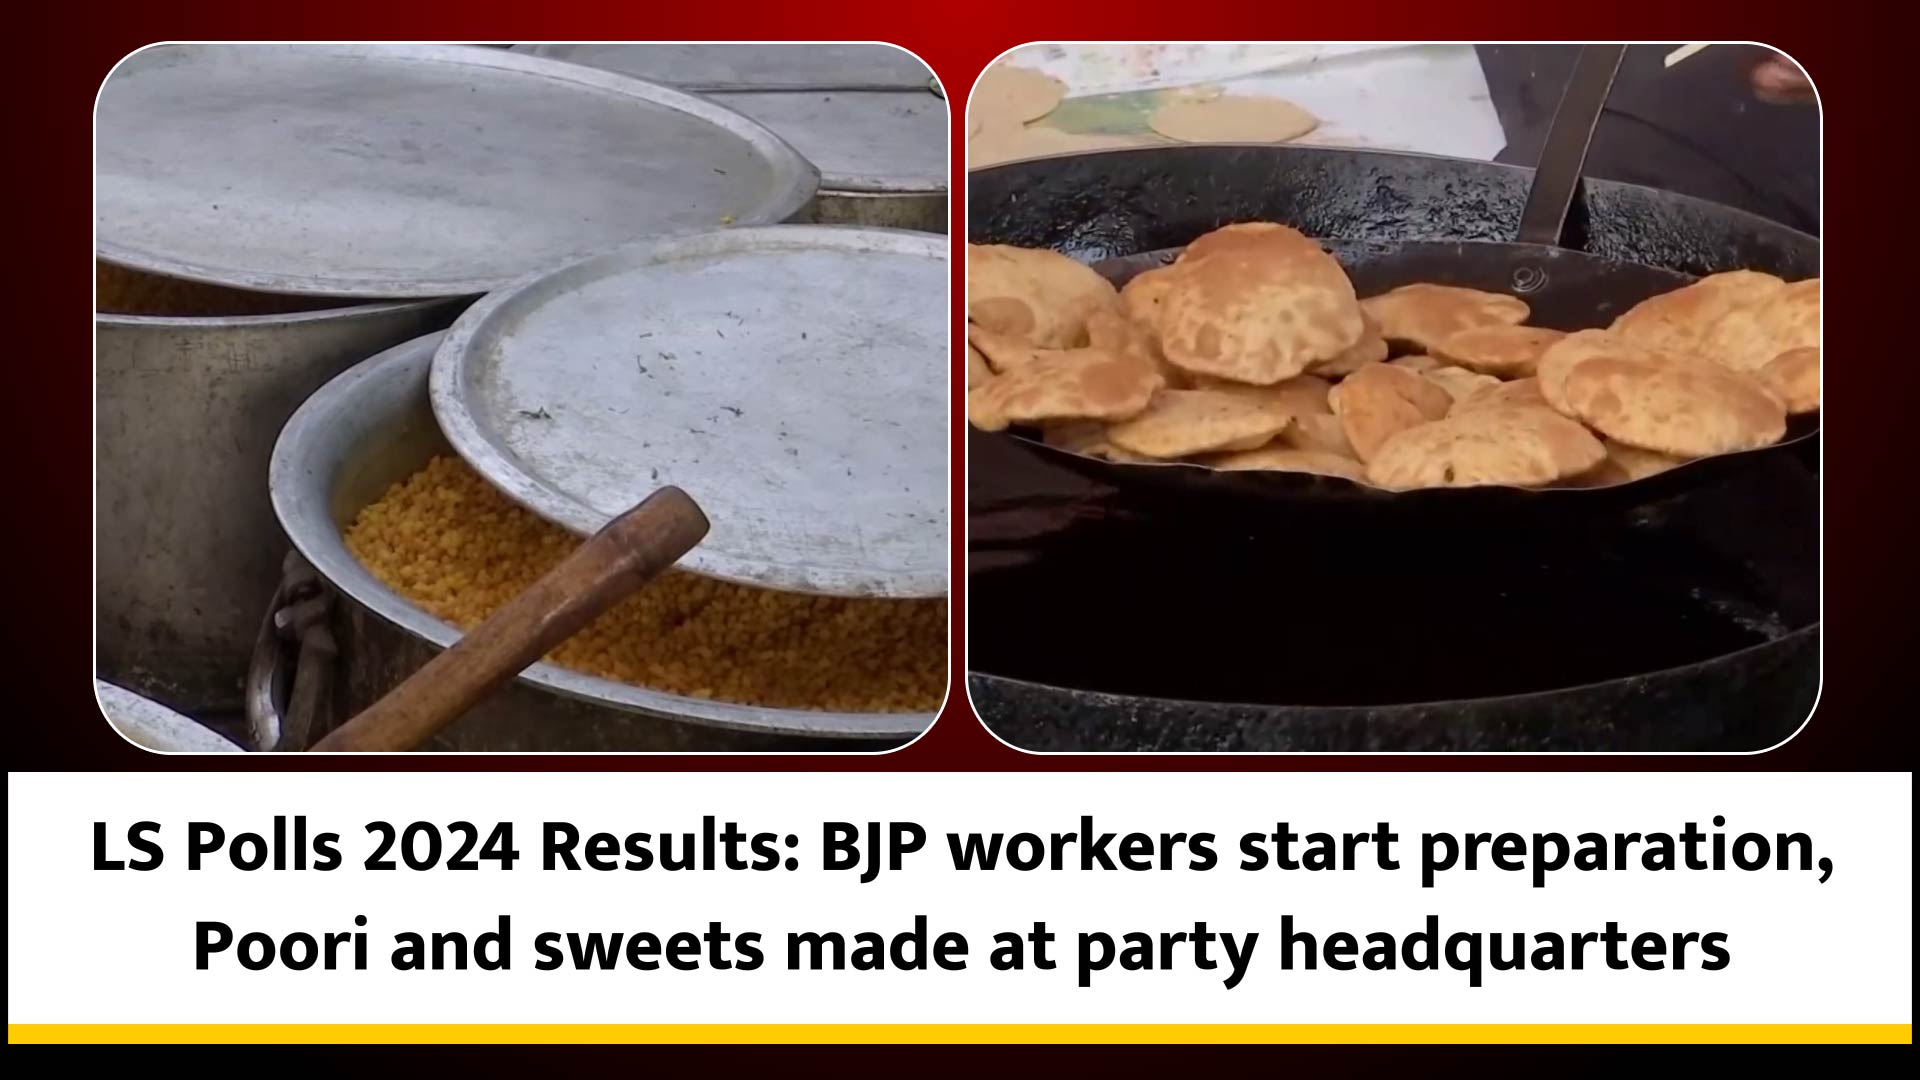 LS Polls 2024 Results: BJP workers start preparation, Poori and sweets made at party headquarters